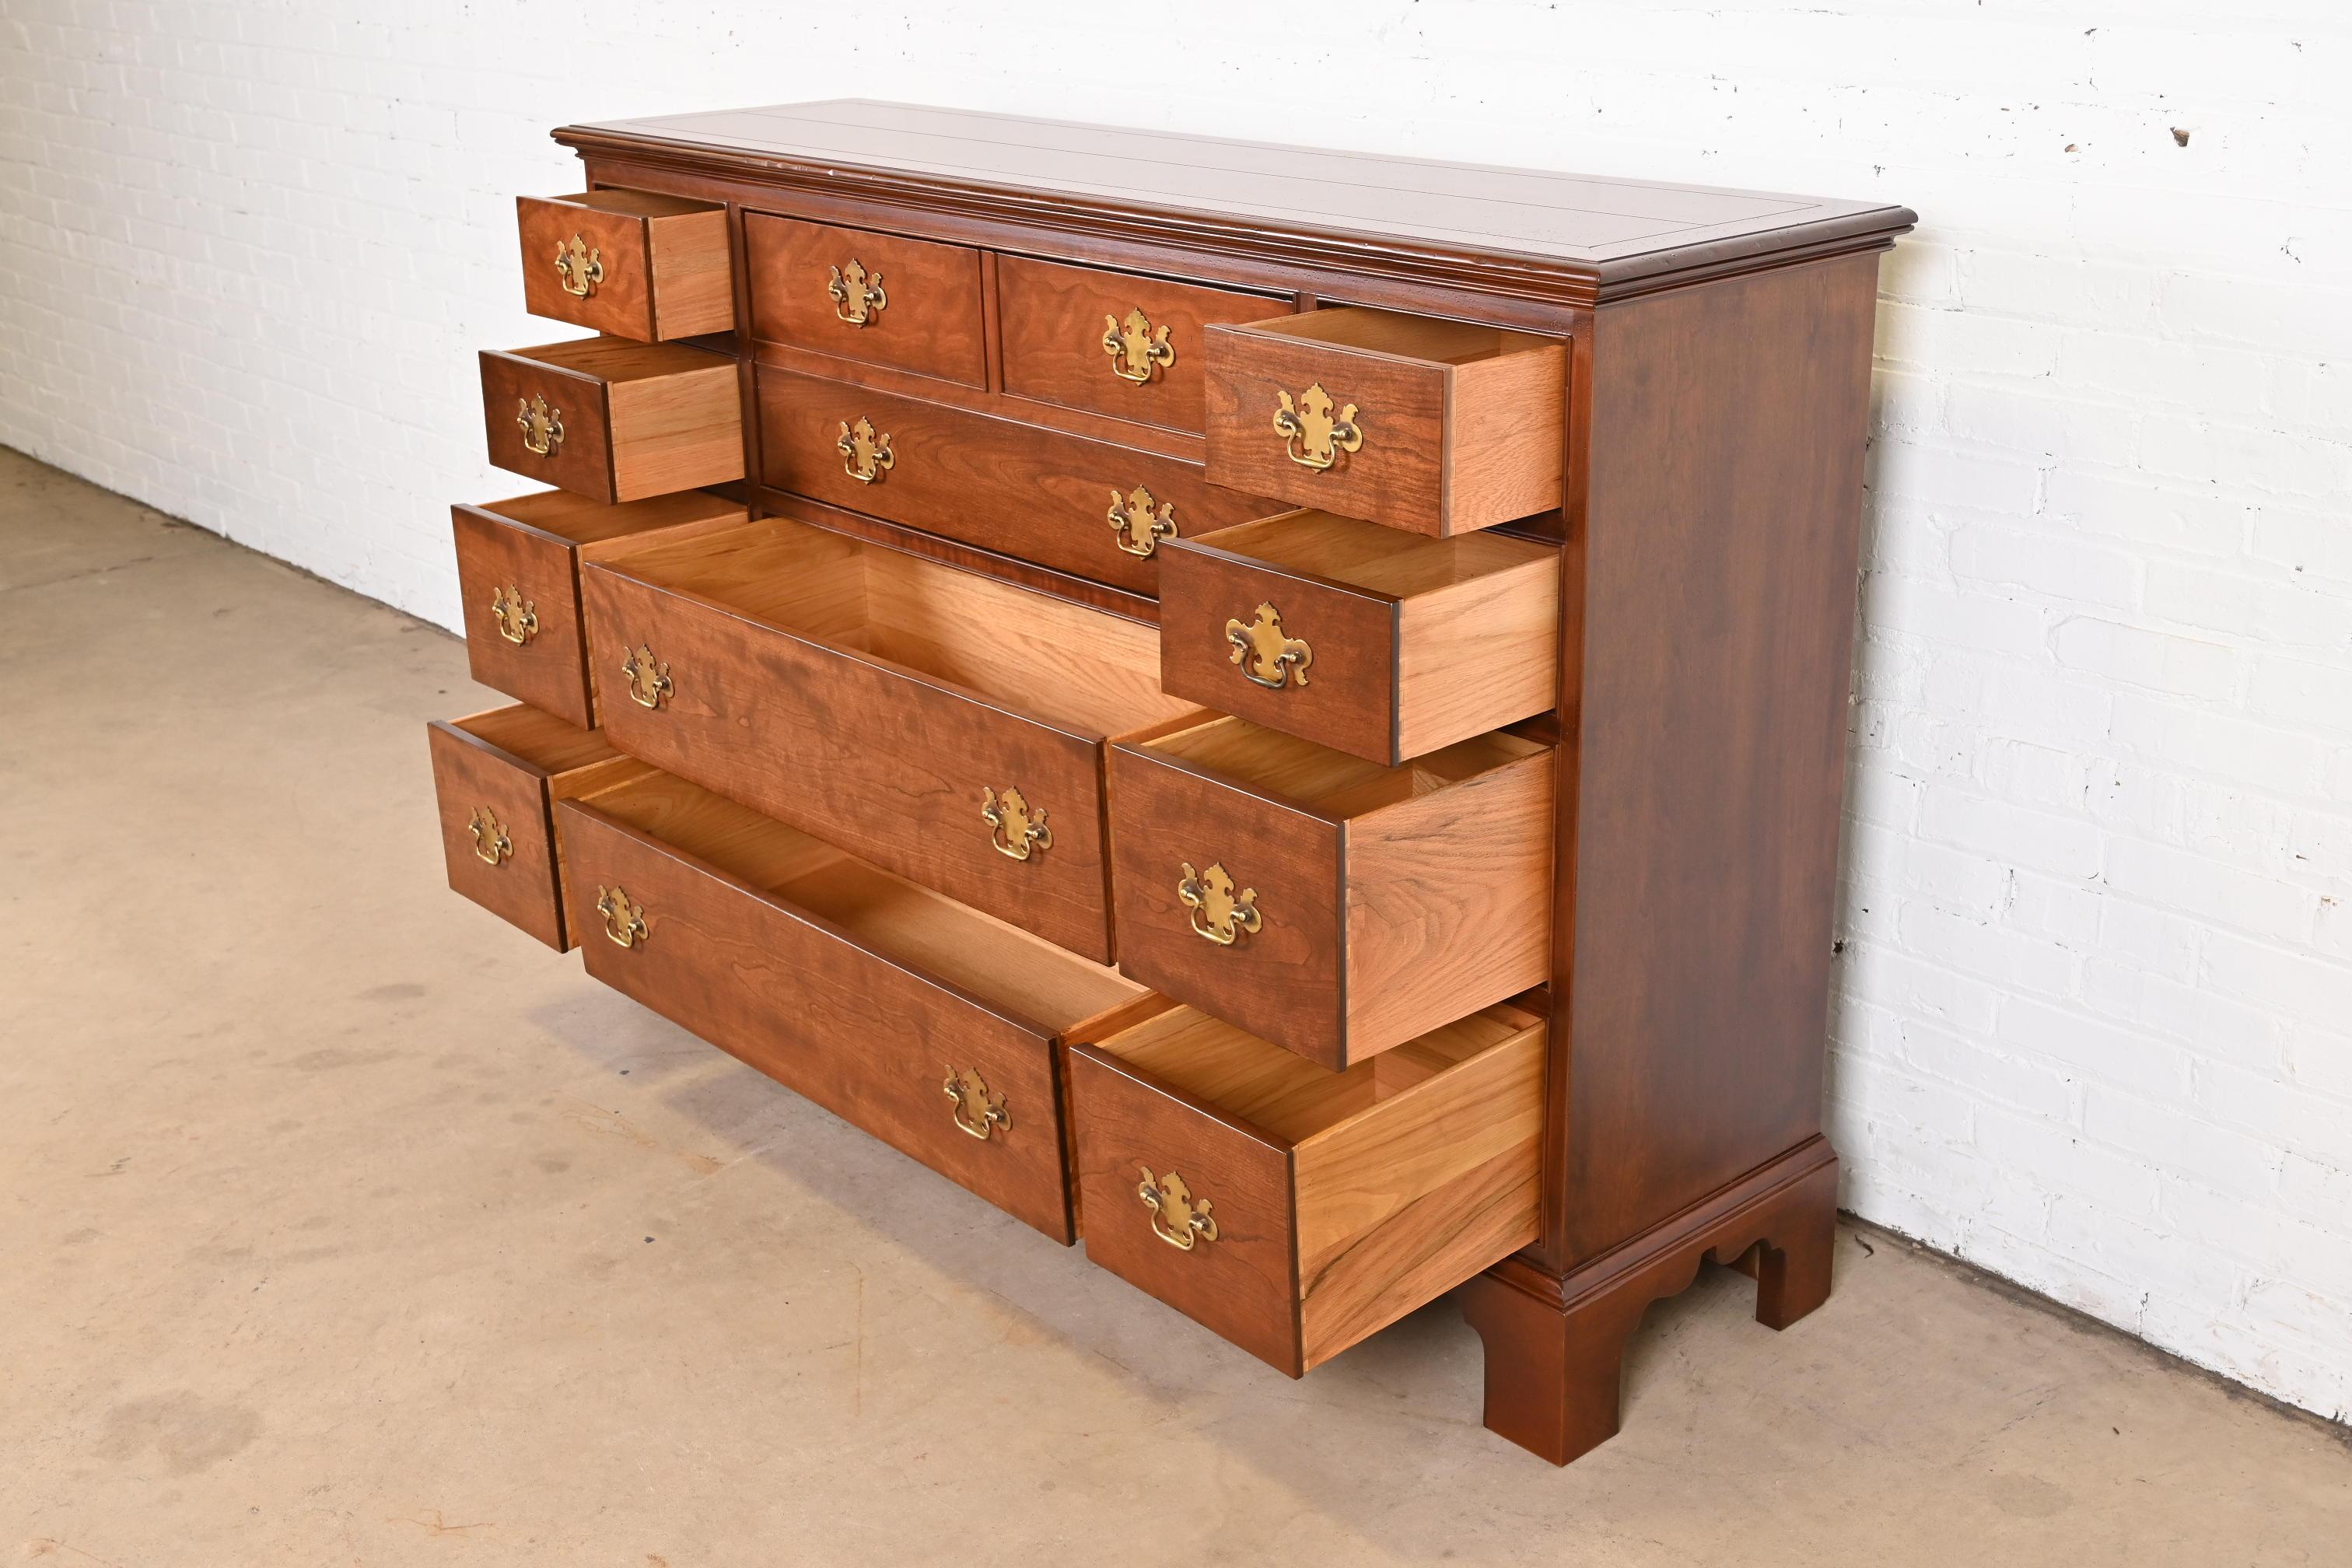 Baker Furniture Georgian Cherry Chest of Drawers with Secretary Desk, Refinished 5